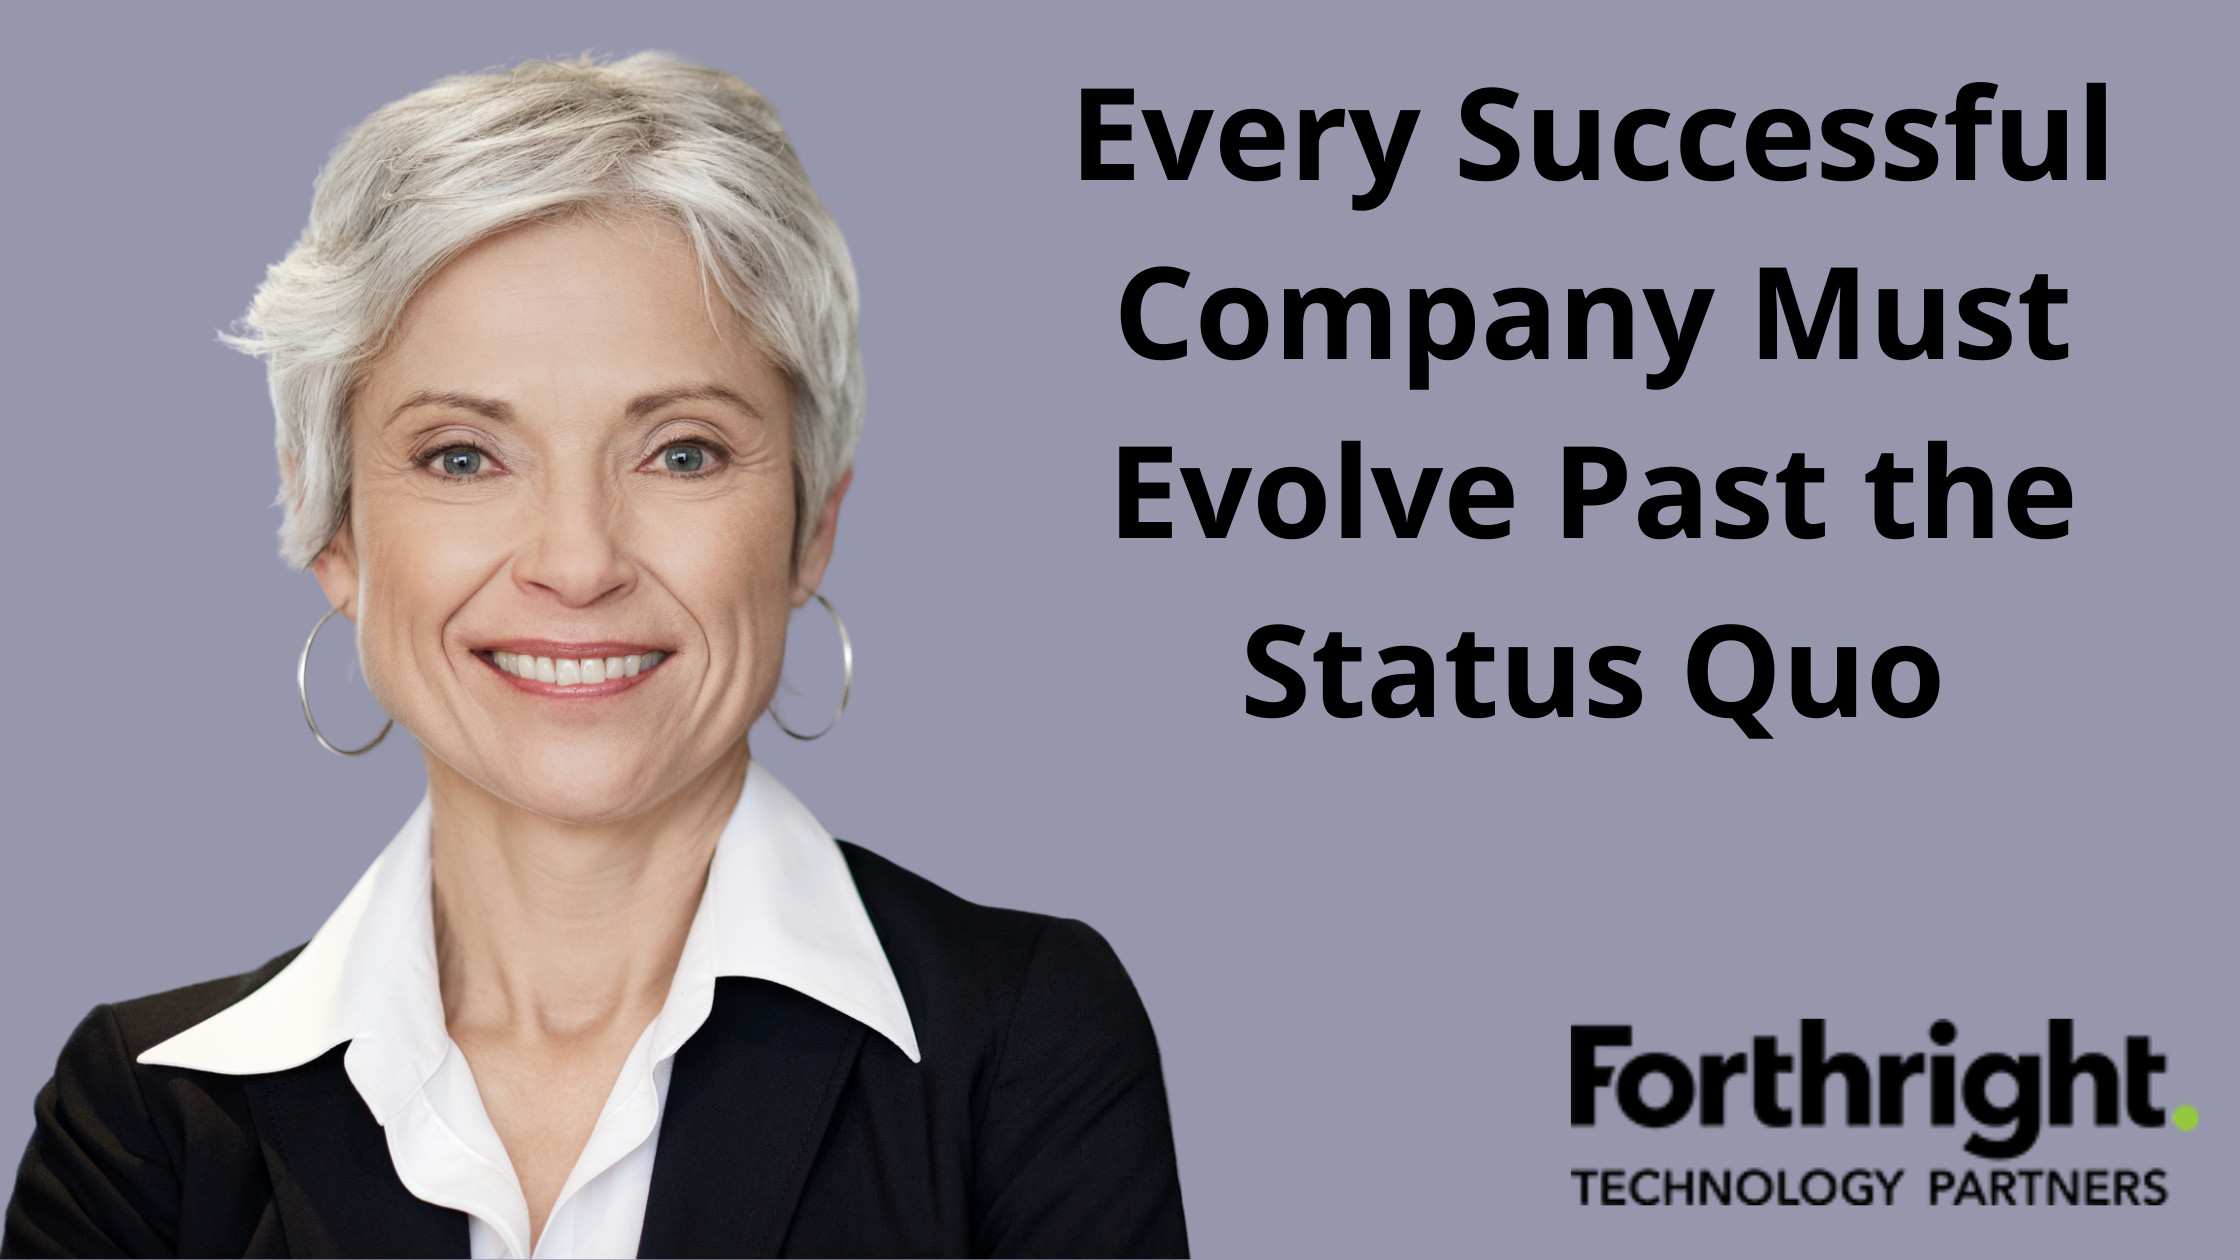 Every Successful Company Must Evolve Past the Status Quo